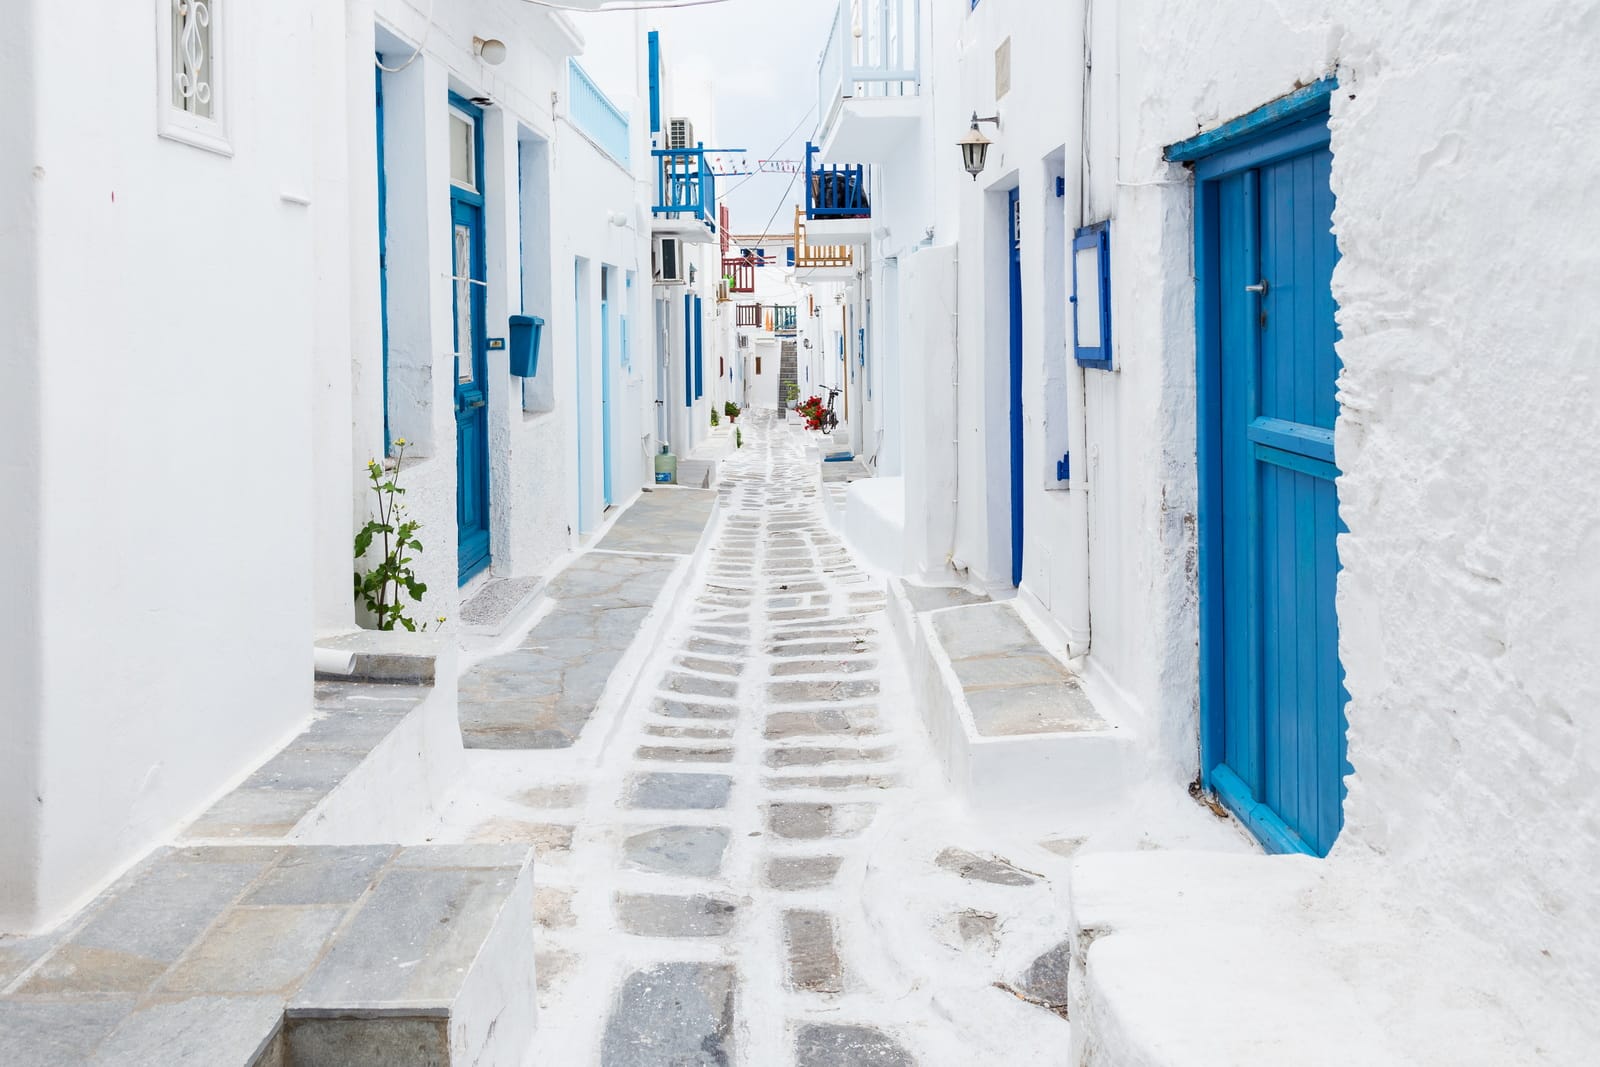 The cobbled roads and whitewashed houses in greece